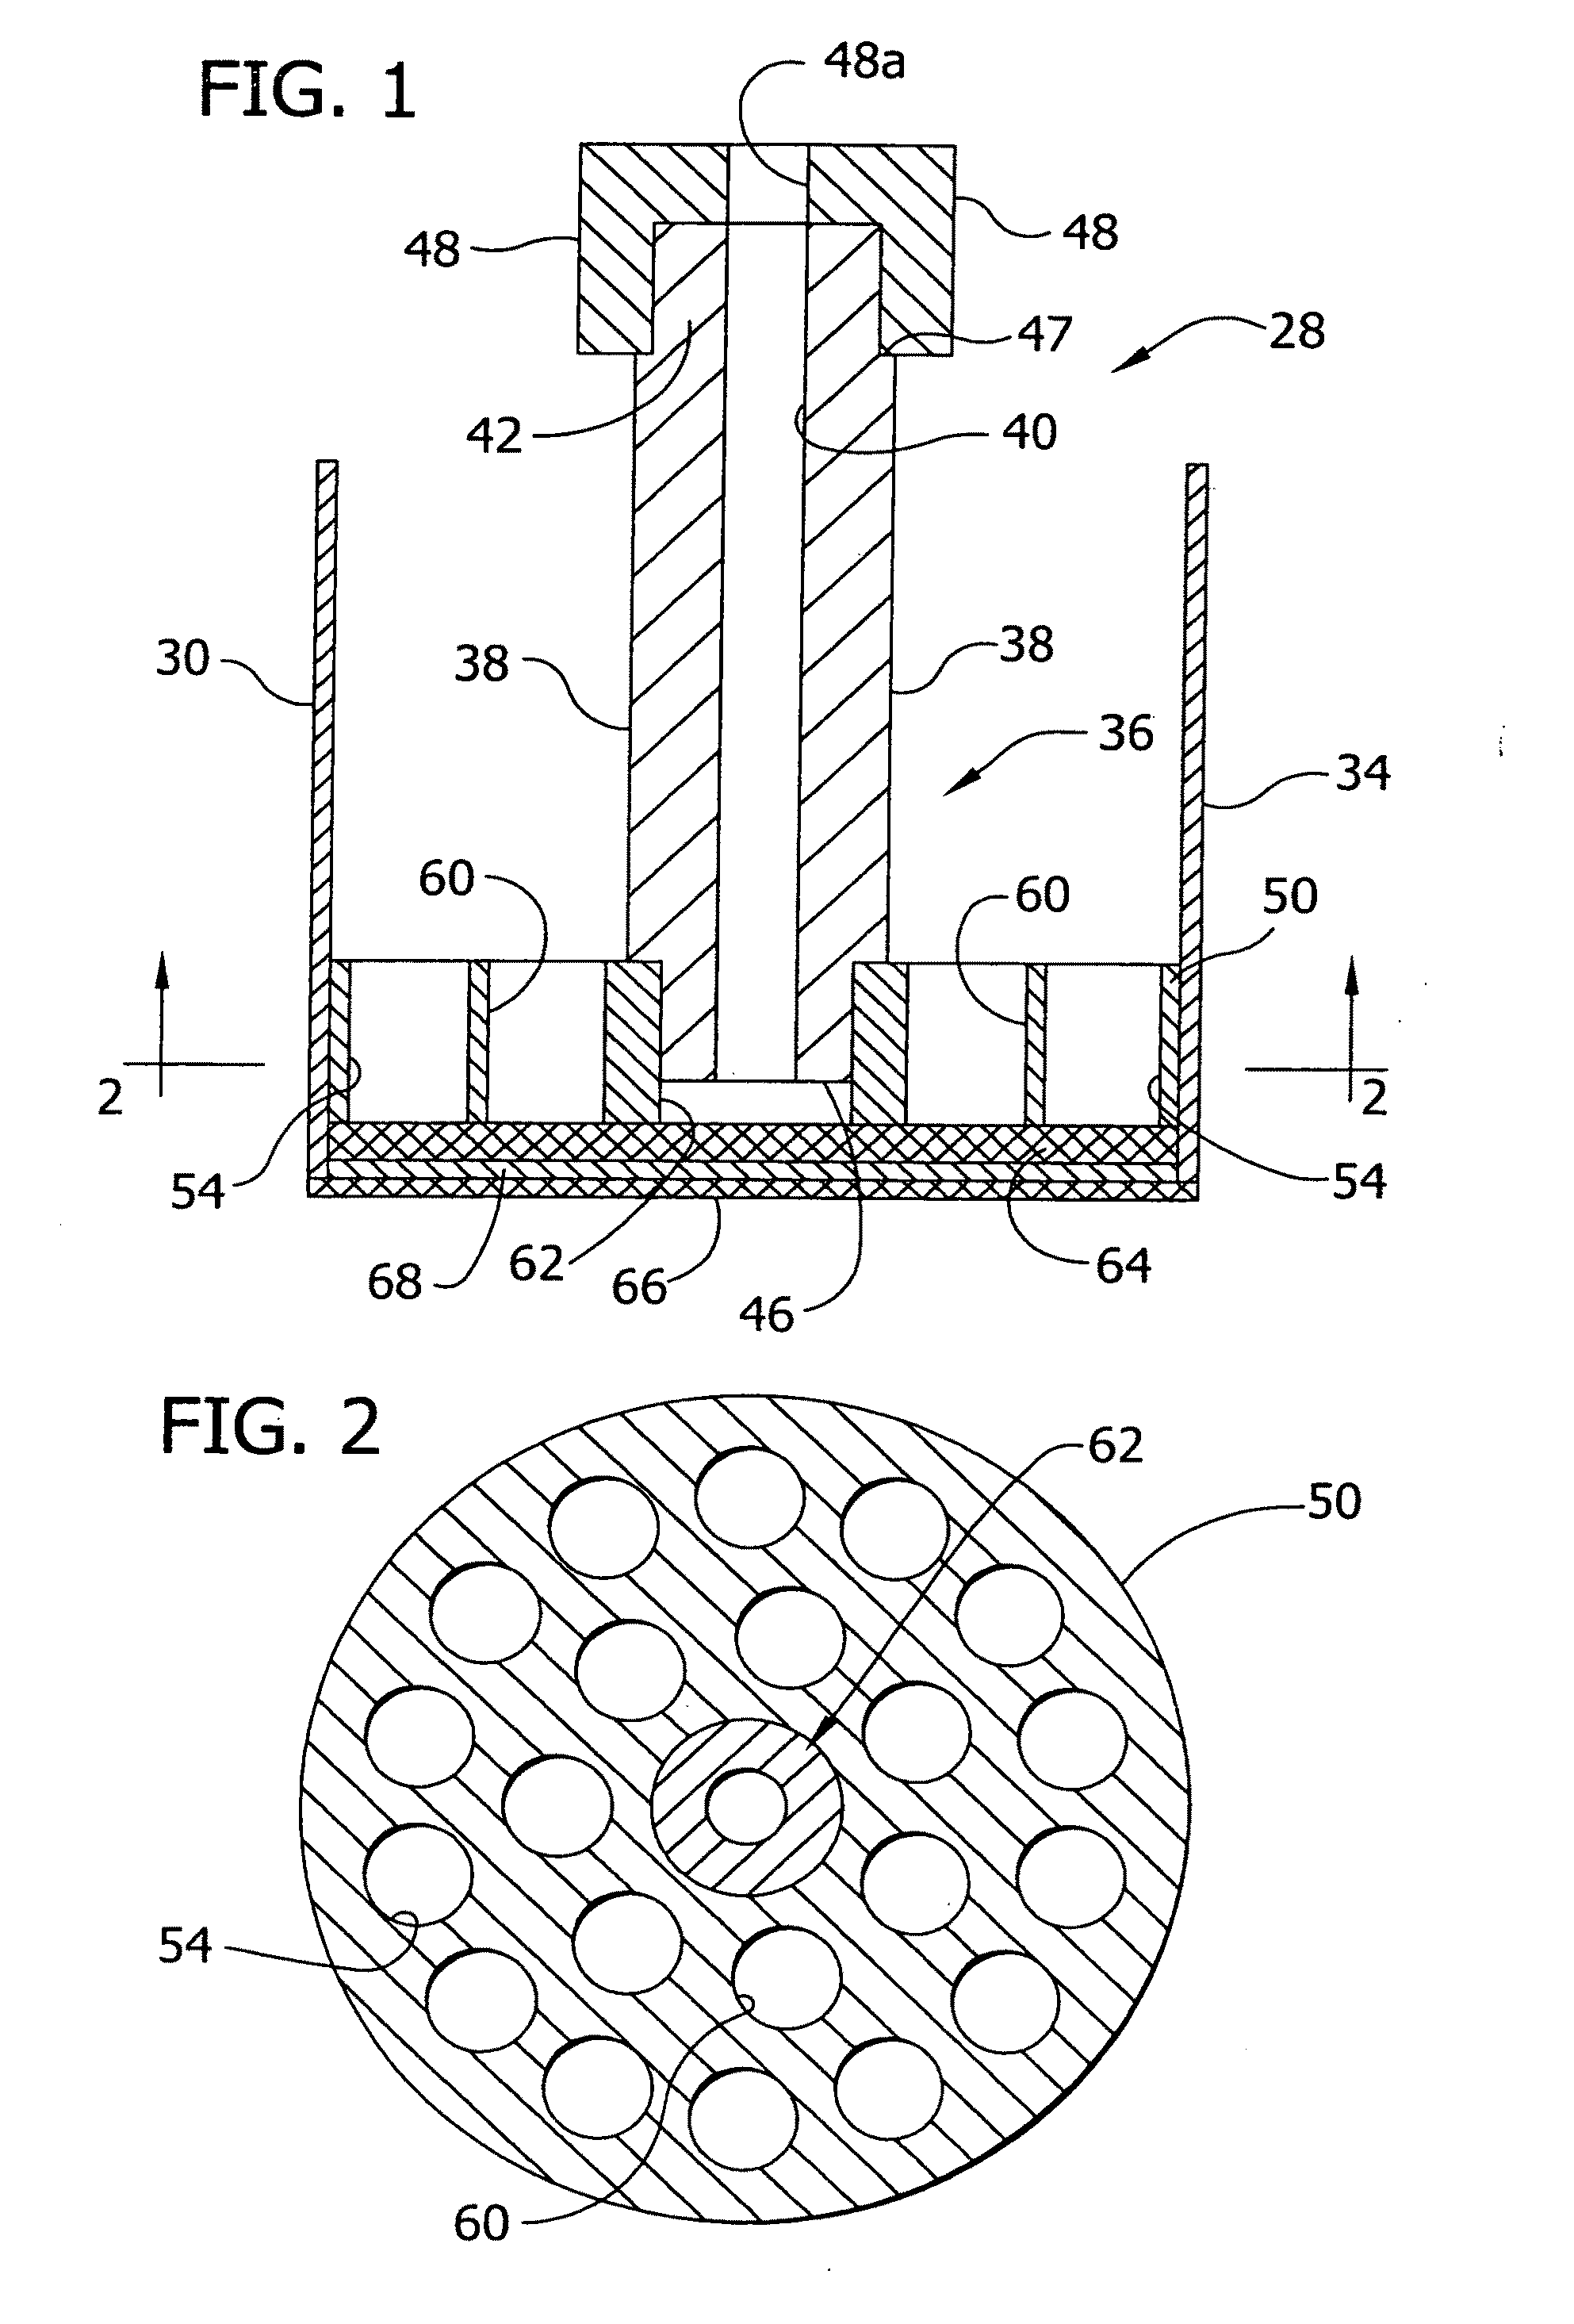 Absorbent structure with superabsorbent material